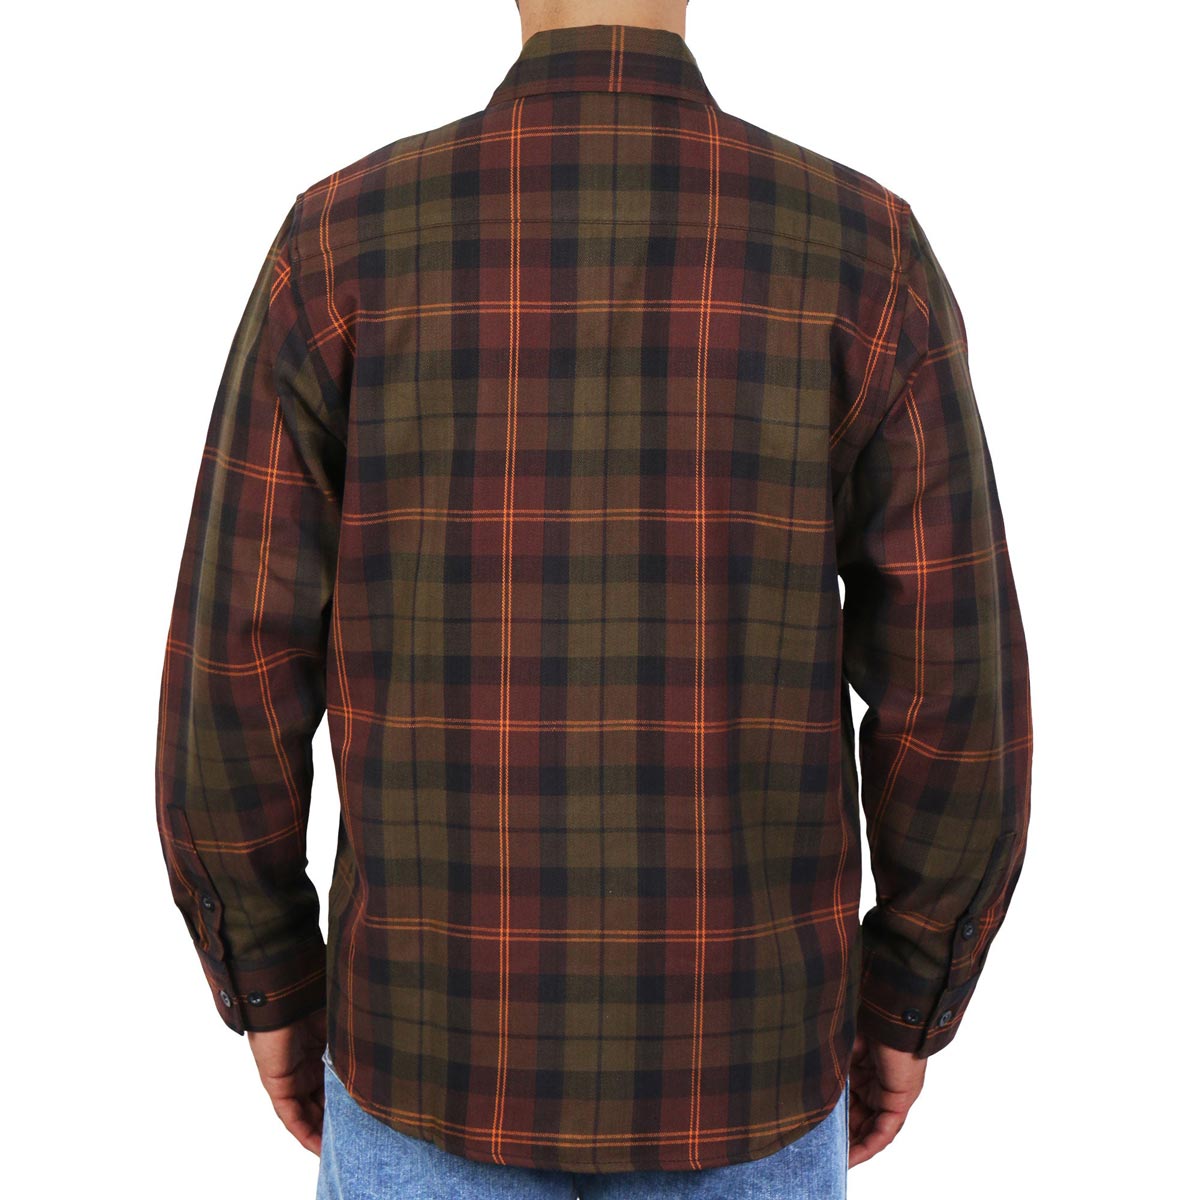 Hot Leathers FLM2040 Men's Green Orange and Brown Long Sleeve Flannel Shirt